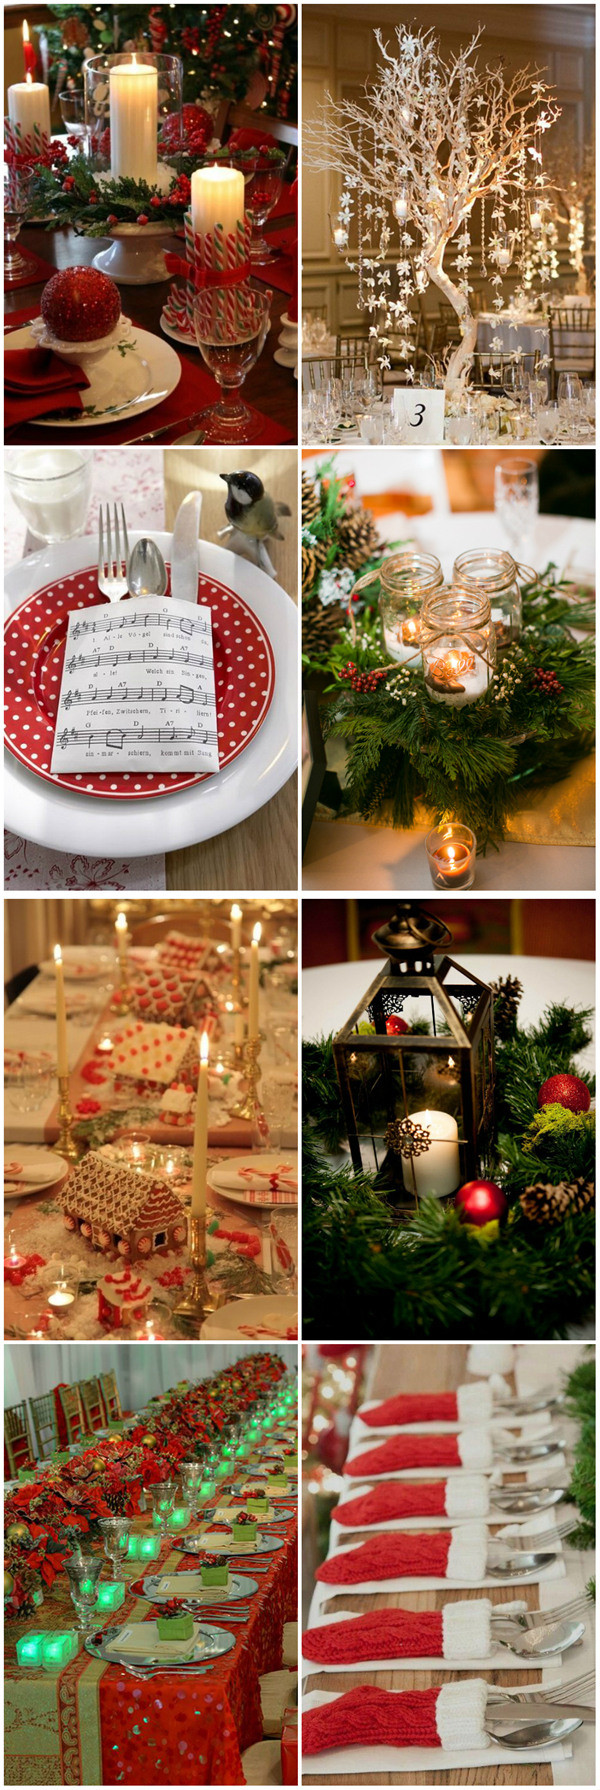 Holiday Party Centerpiece Ideas
 Top 25 Christmas wedding ideas of the year 2015